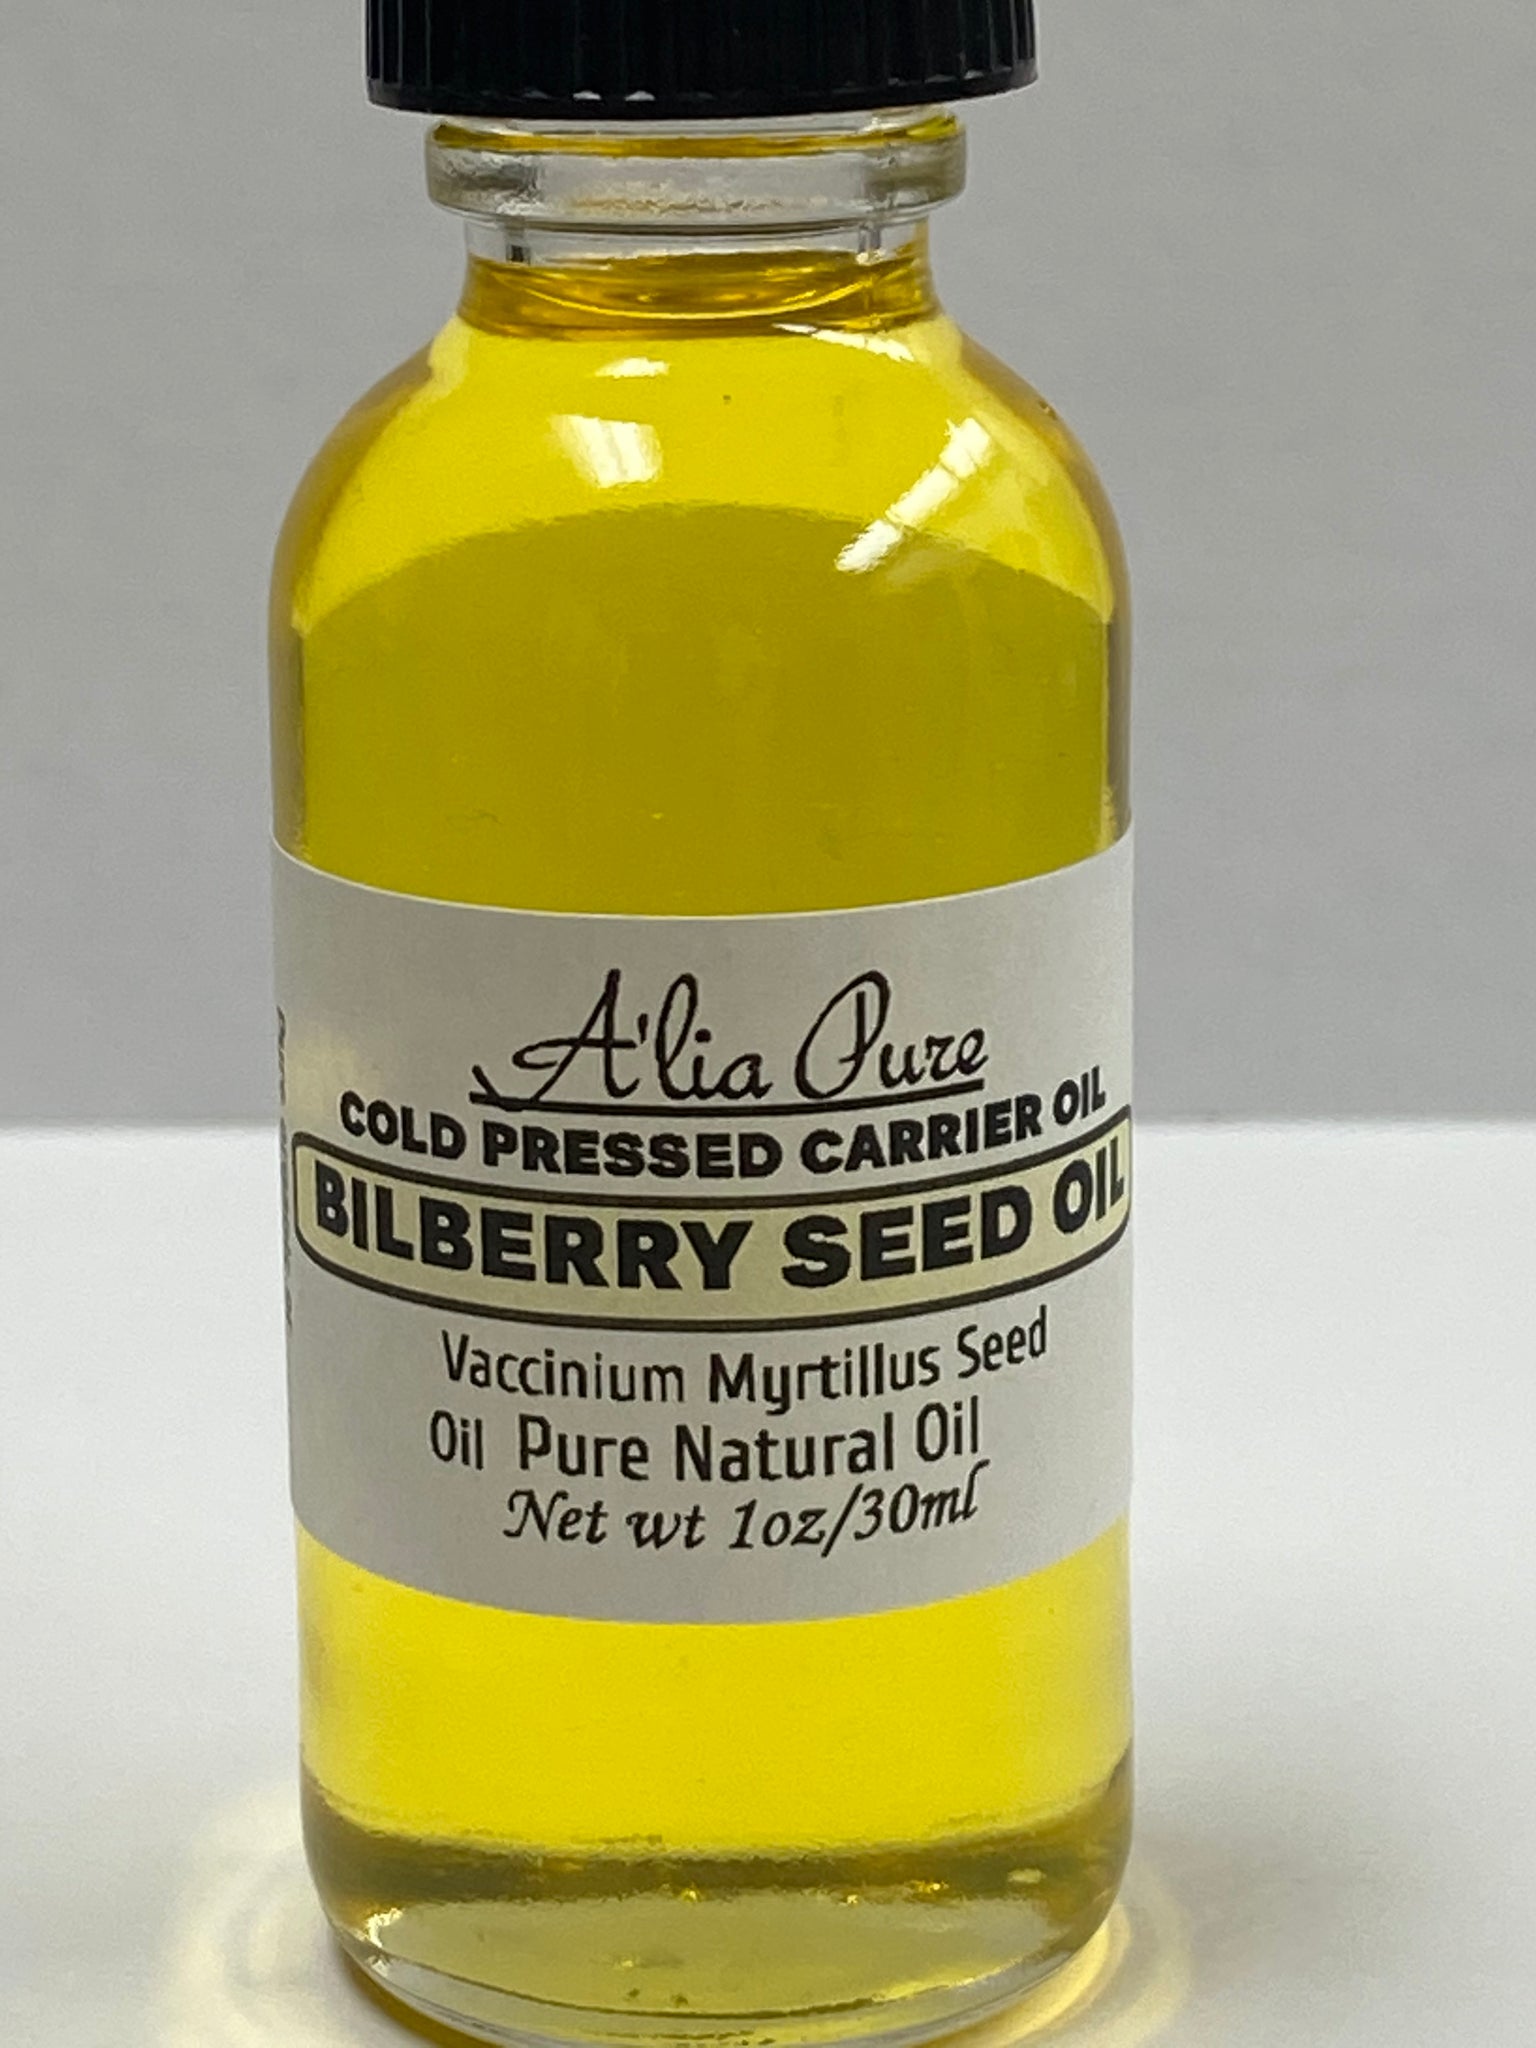 Bilberry Seed Oil